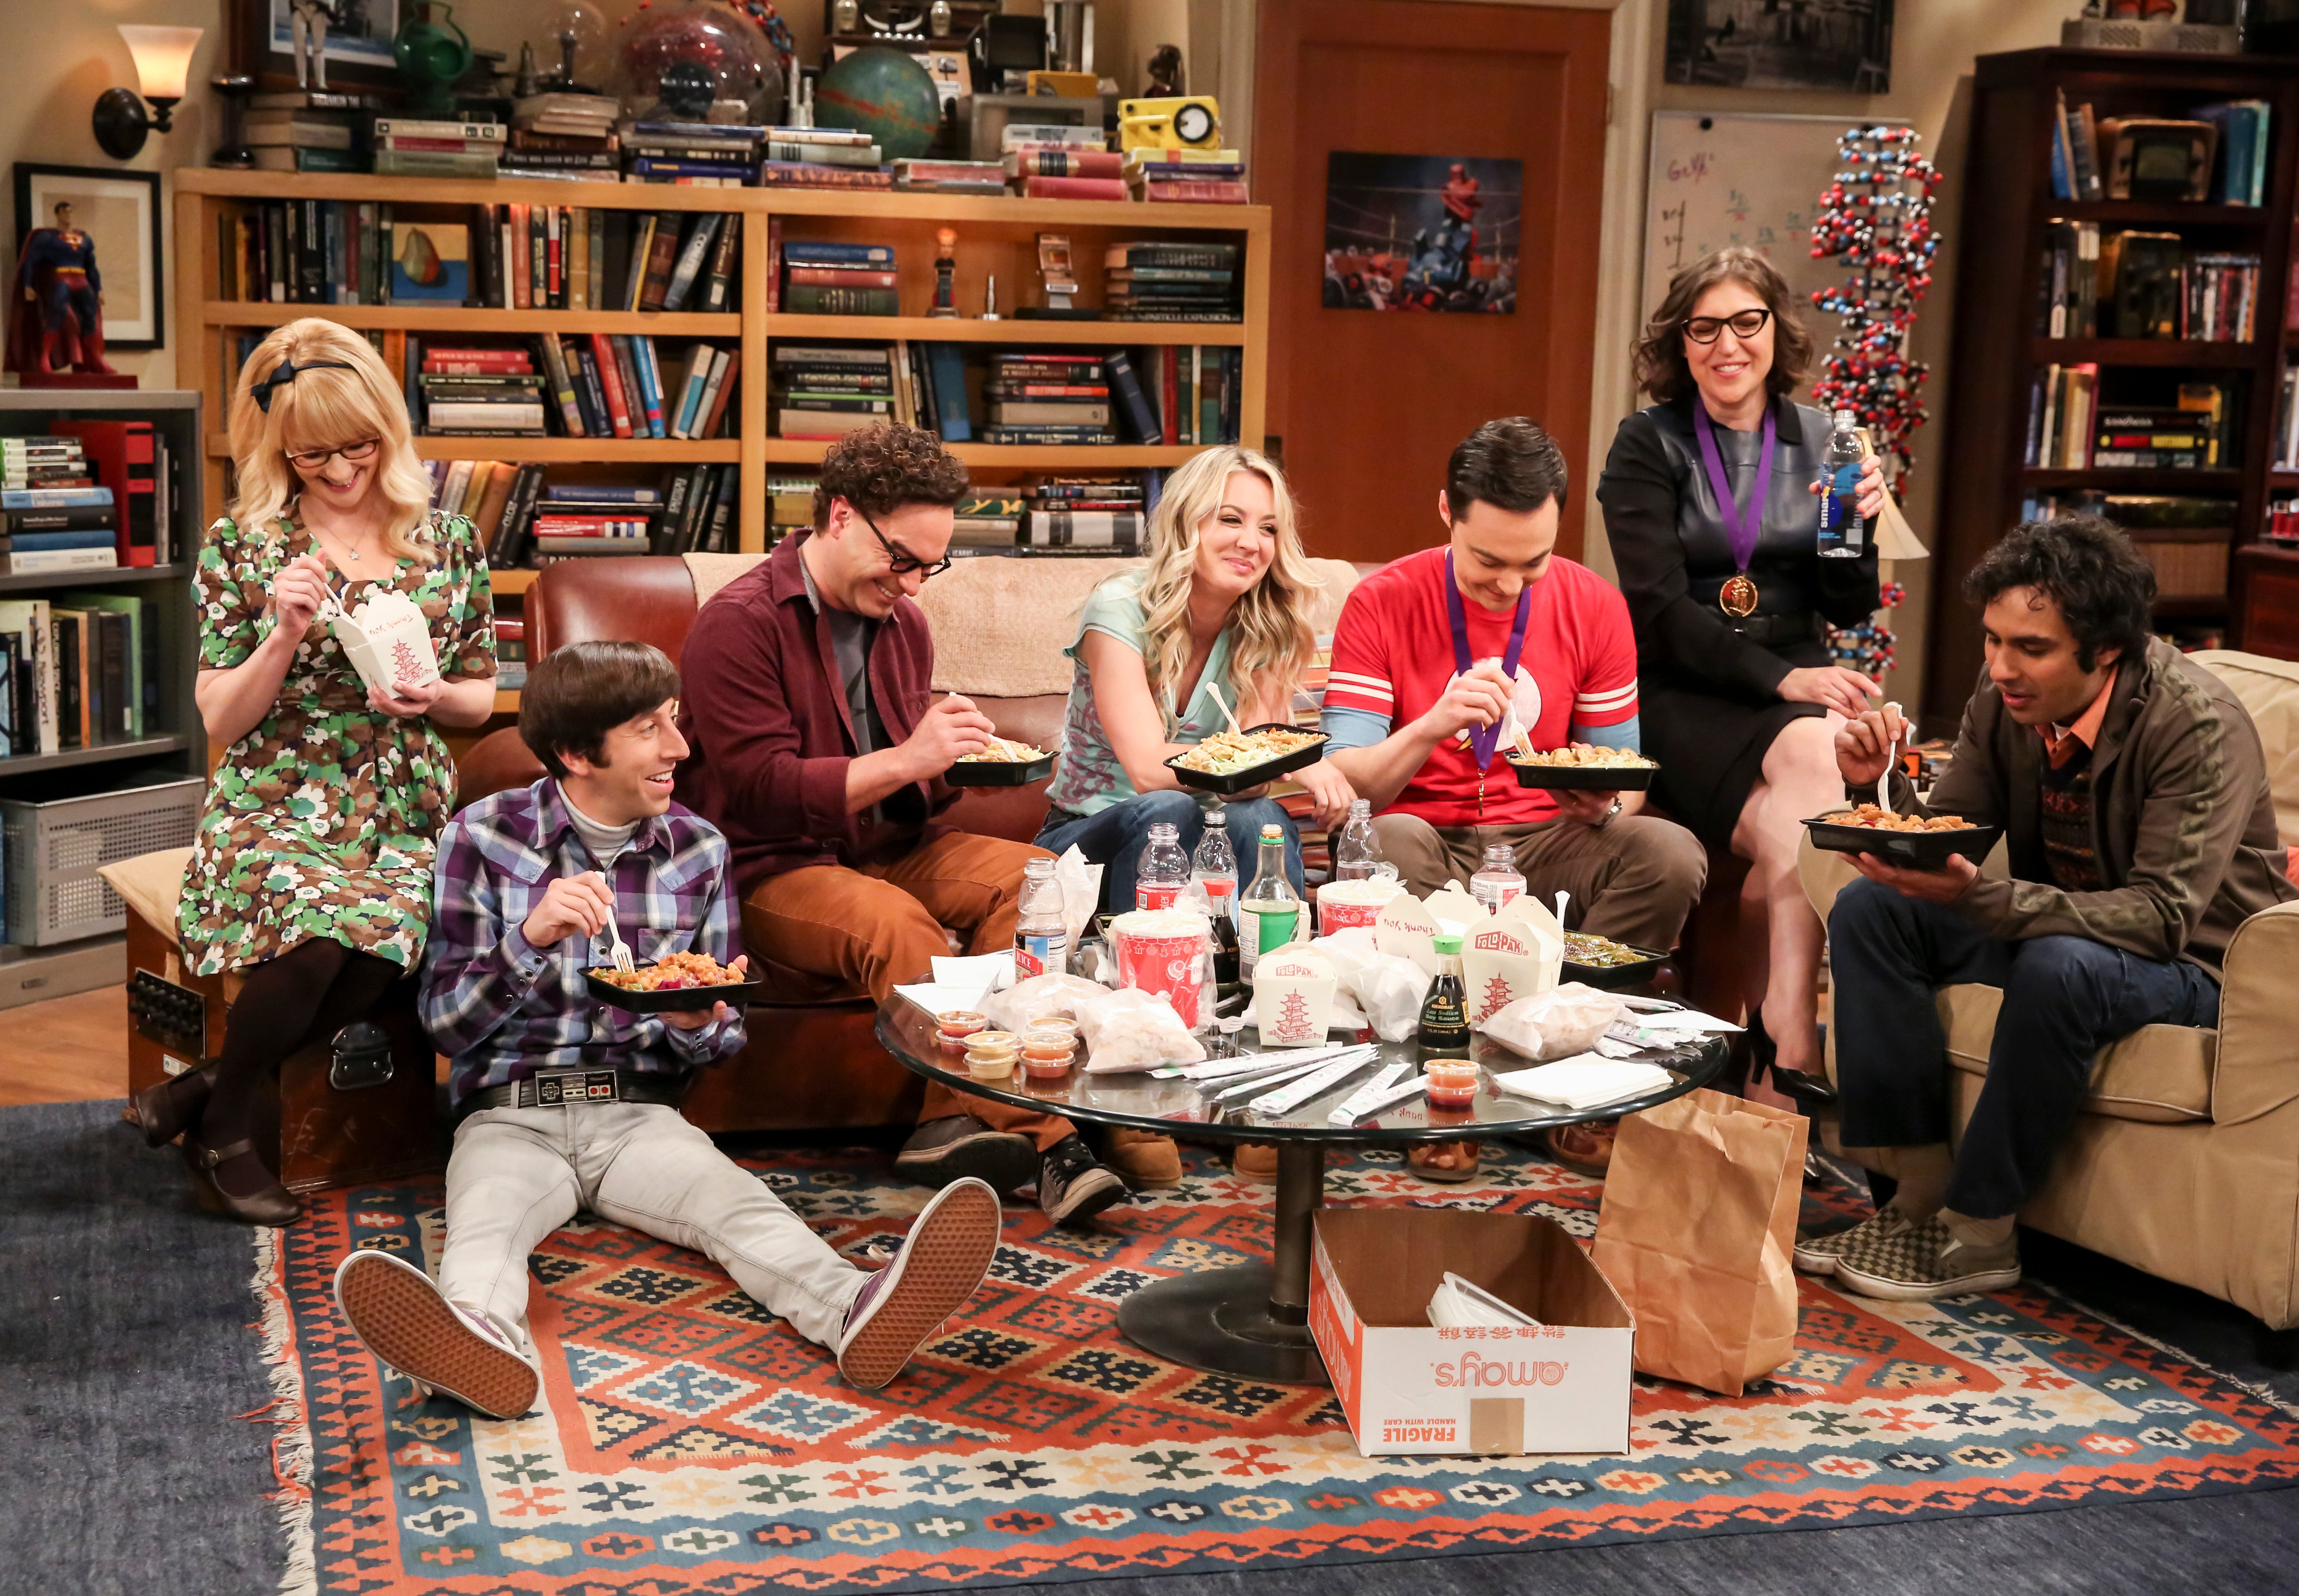 New 'Big Bang Theory' Series Is in the Works